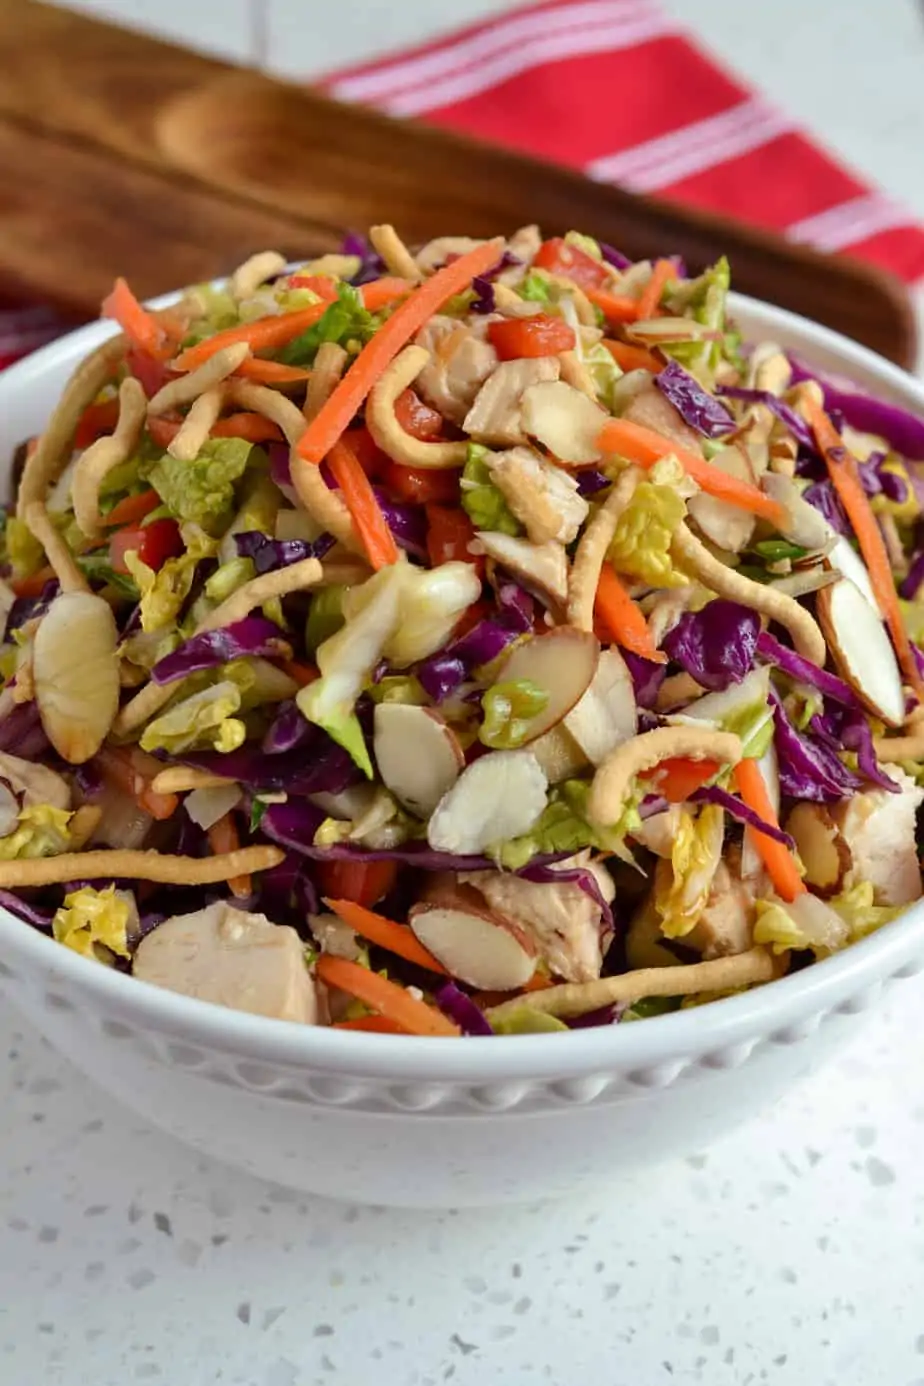 Chinese Chicken Salad with Napa cabbage, carrots and almonds. 